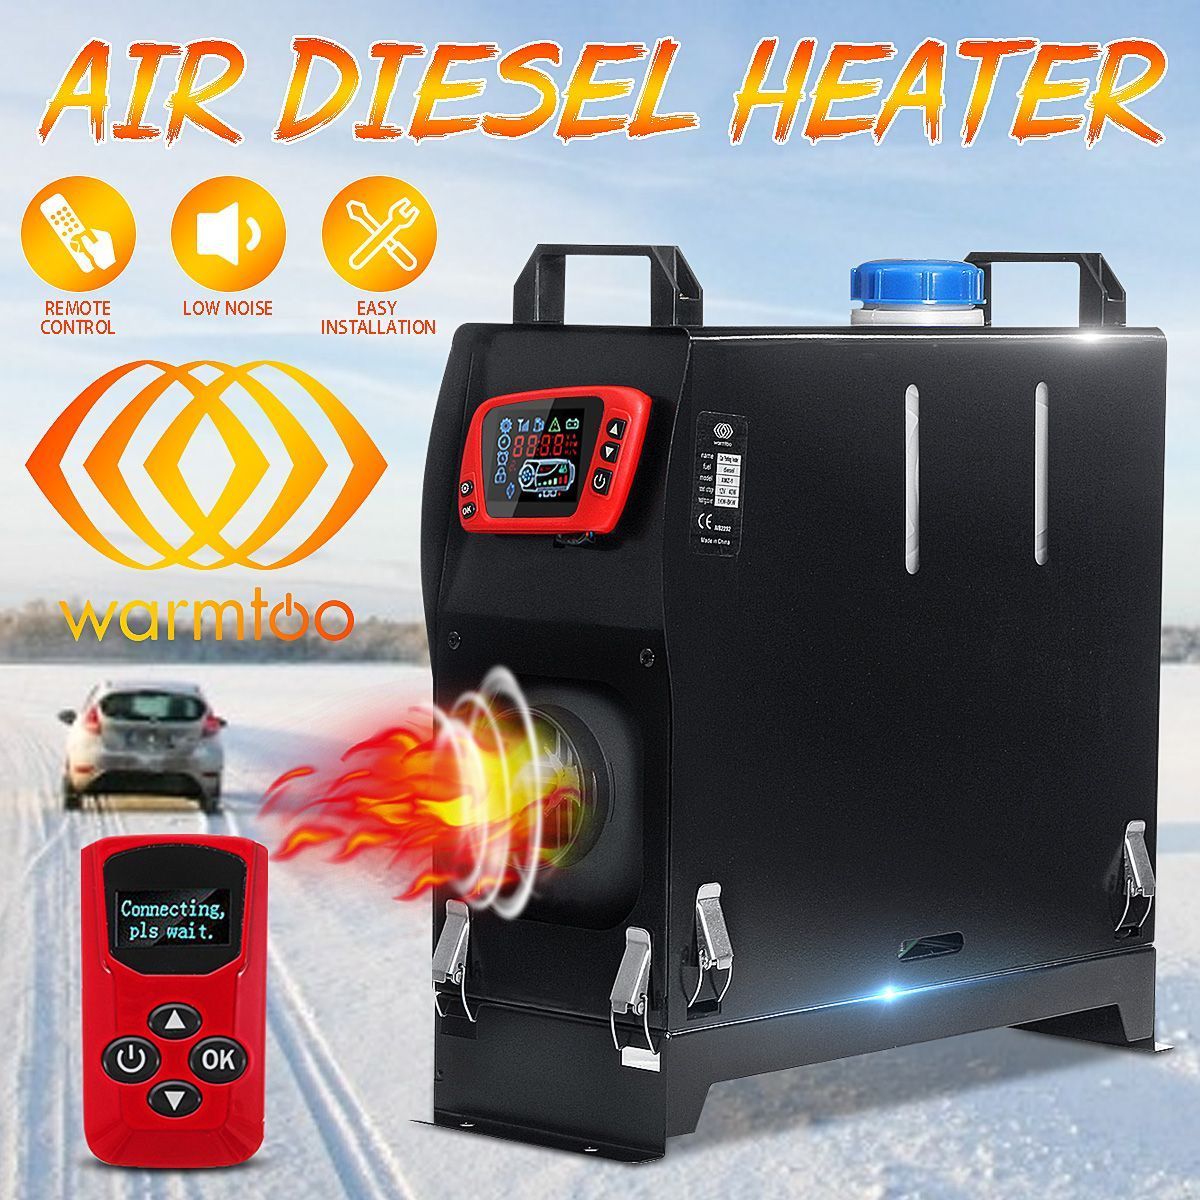 All-In-One-12V-8KW-Diesel-Air-Heater-Car-Parking-Heater-for-Car-with-Remote-Controller-1561585